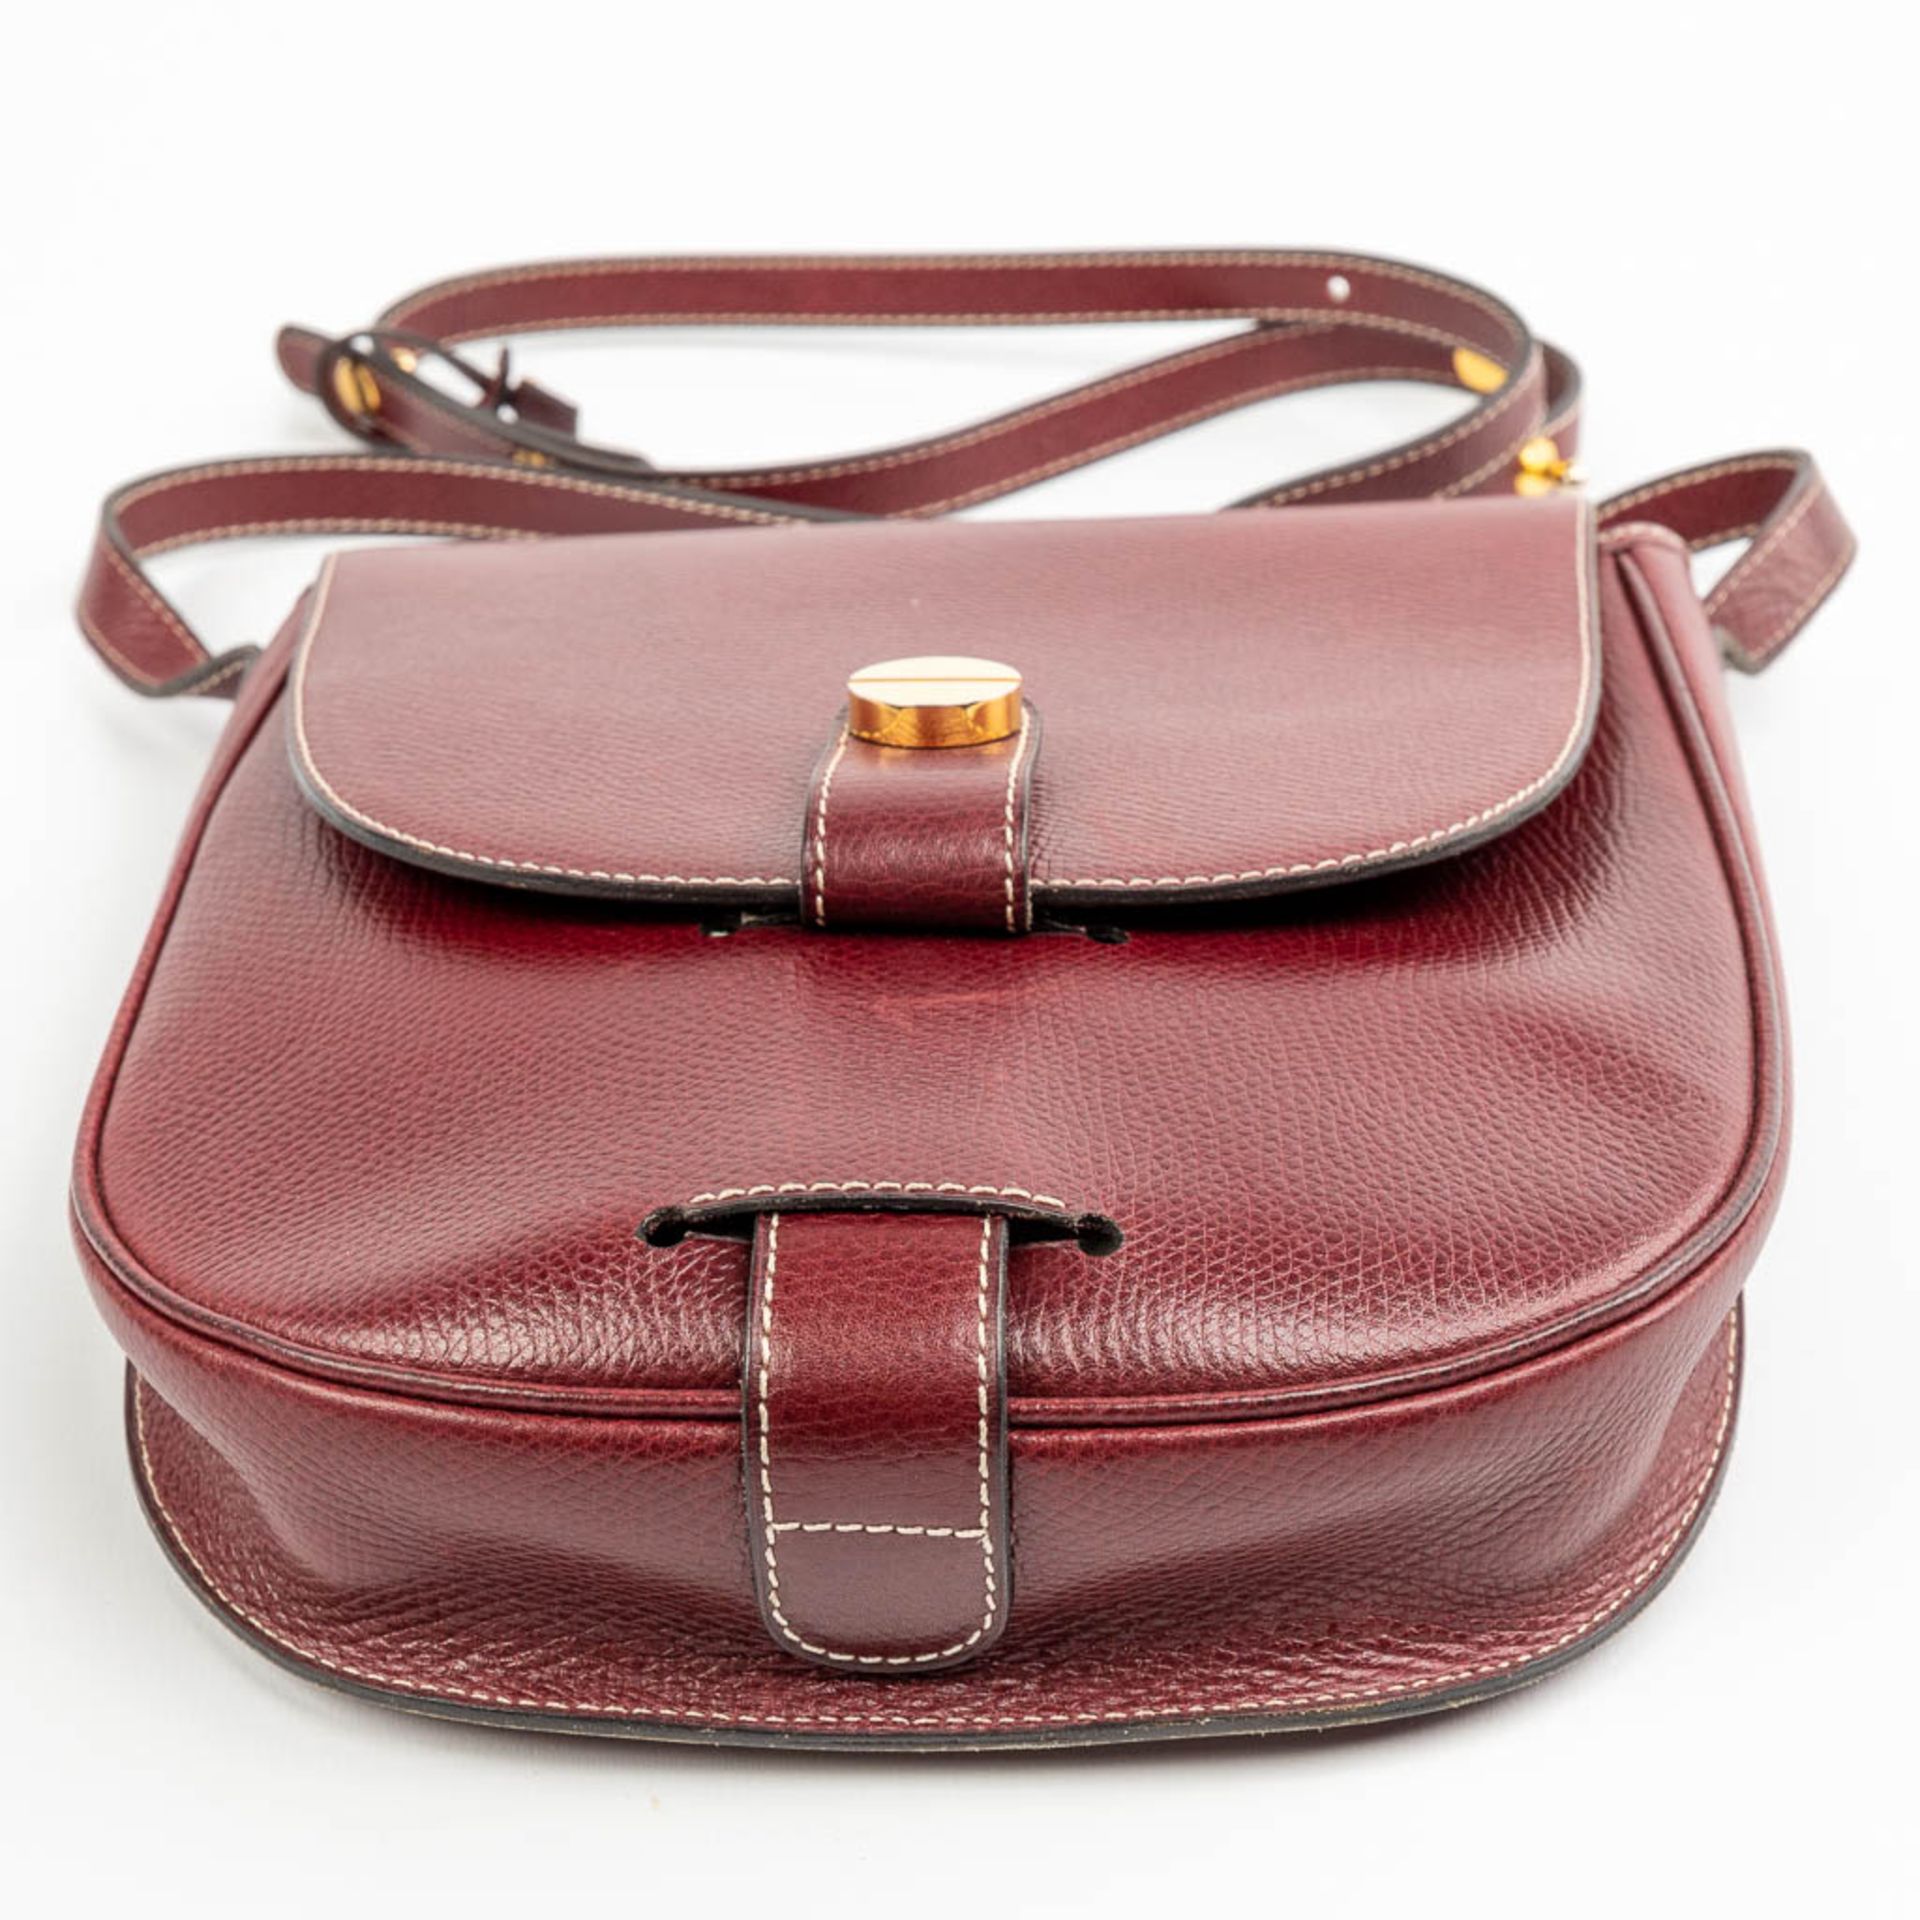 A purse made of red leather and marked Delvaux. - Image 4 of 10